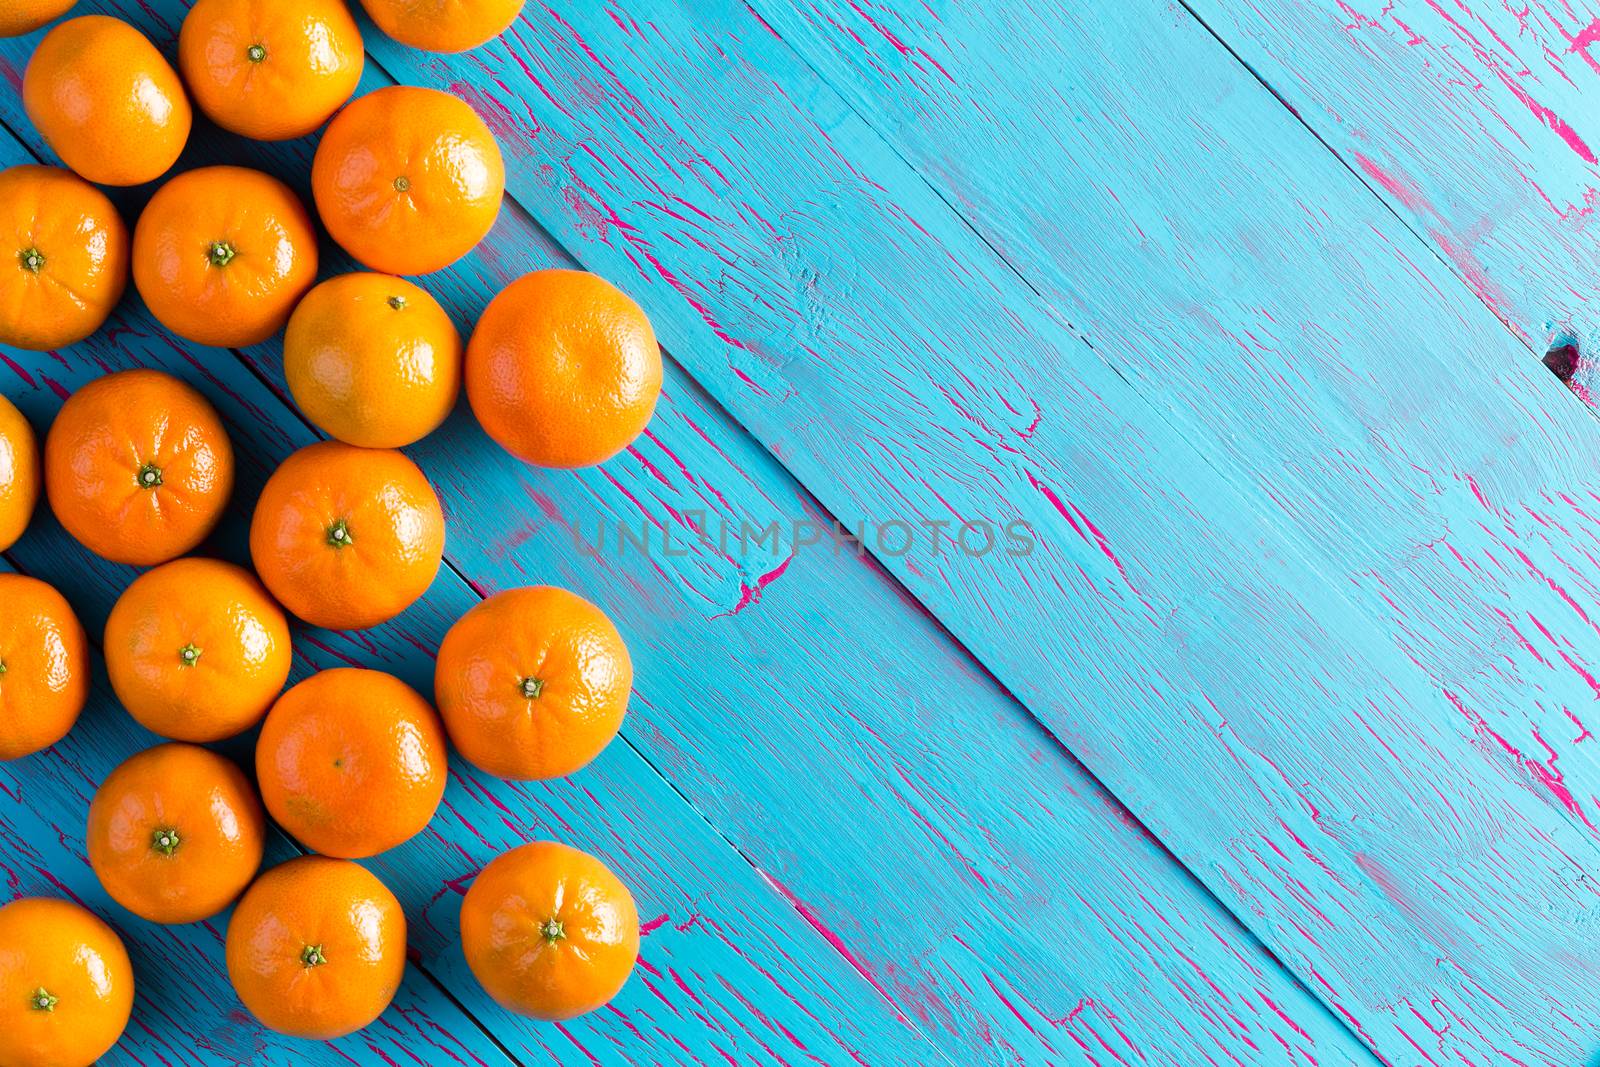 Colorful fresh orange mandarins laid out on a rustic cracked blue painted wooden picnic table viewed from above with copy space